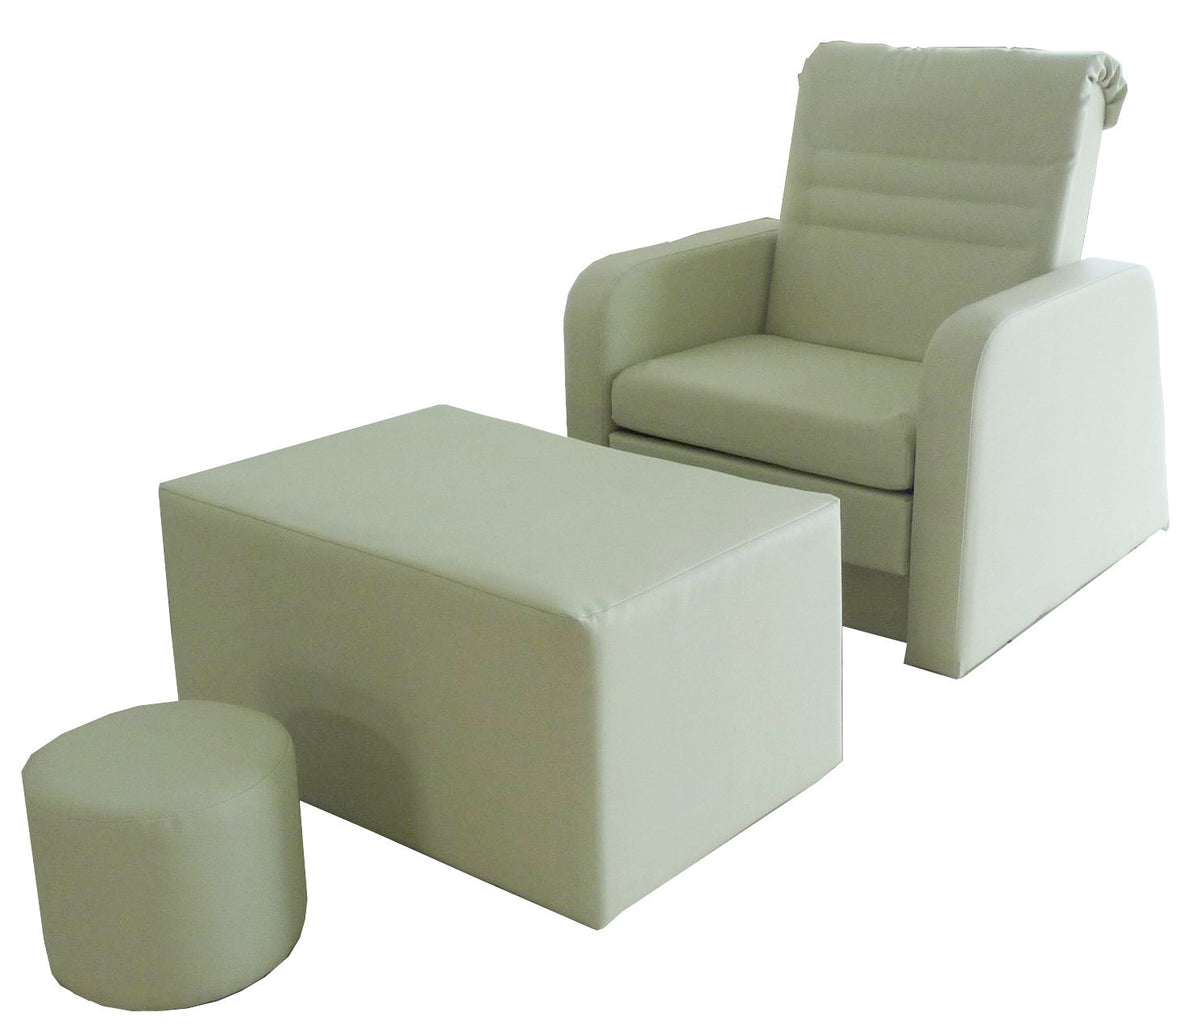 Portable Pedicure Foot Rests in Custom Color Upholstery